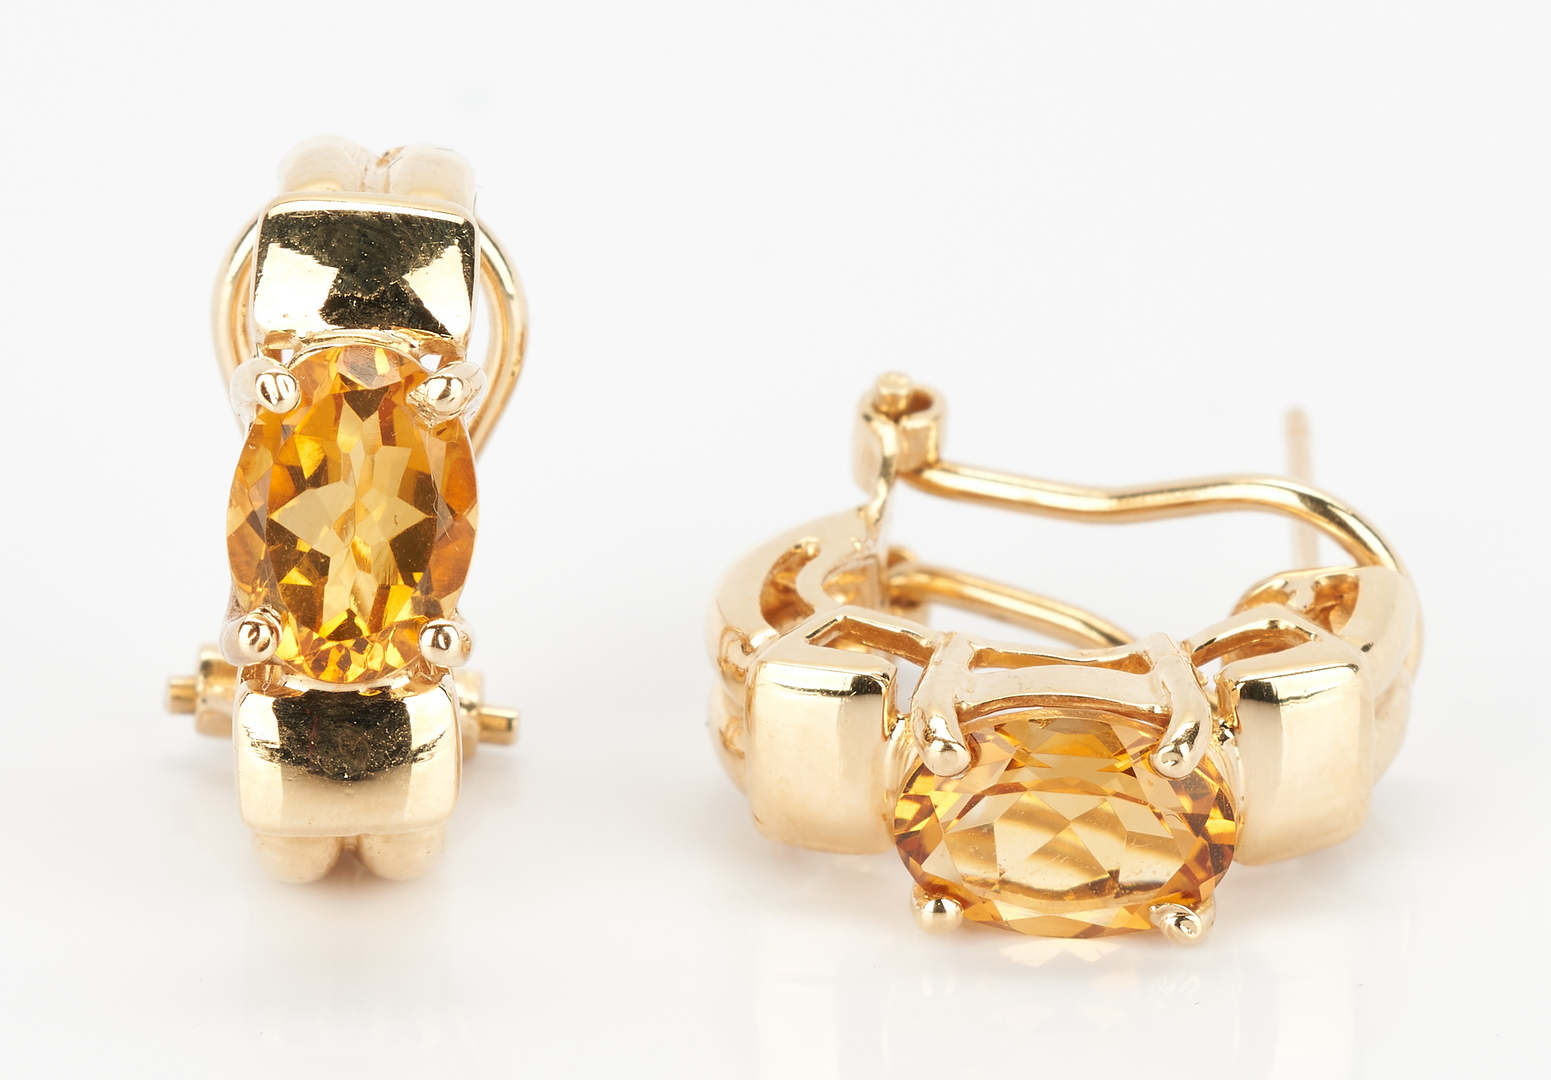 Lot 783: Ladies 14K Gold and Imperial Topaz Earrings